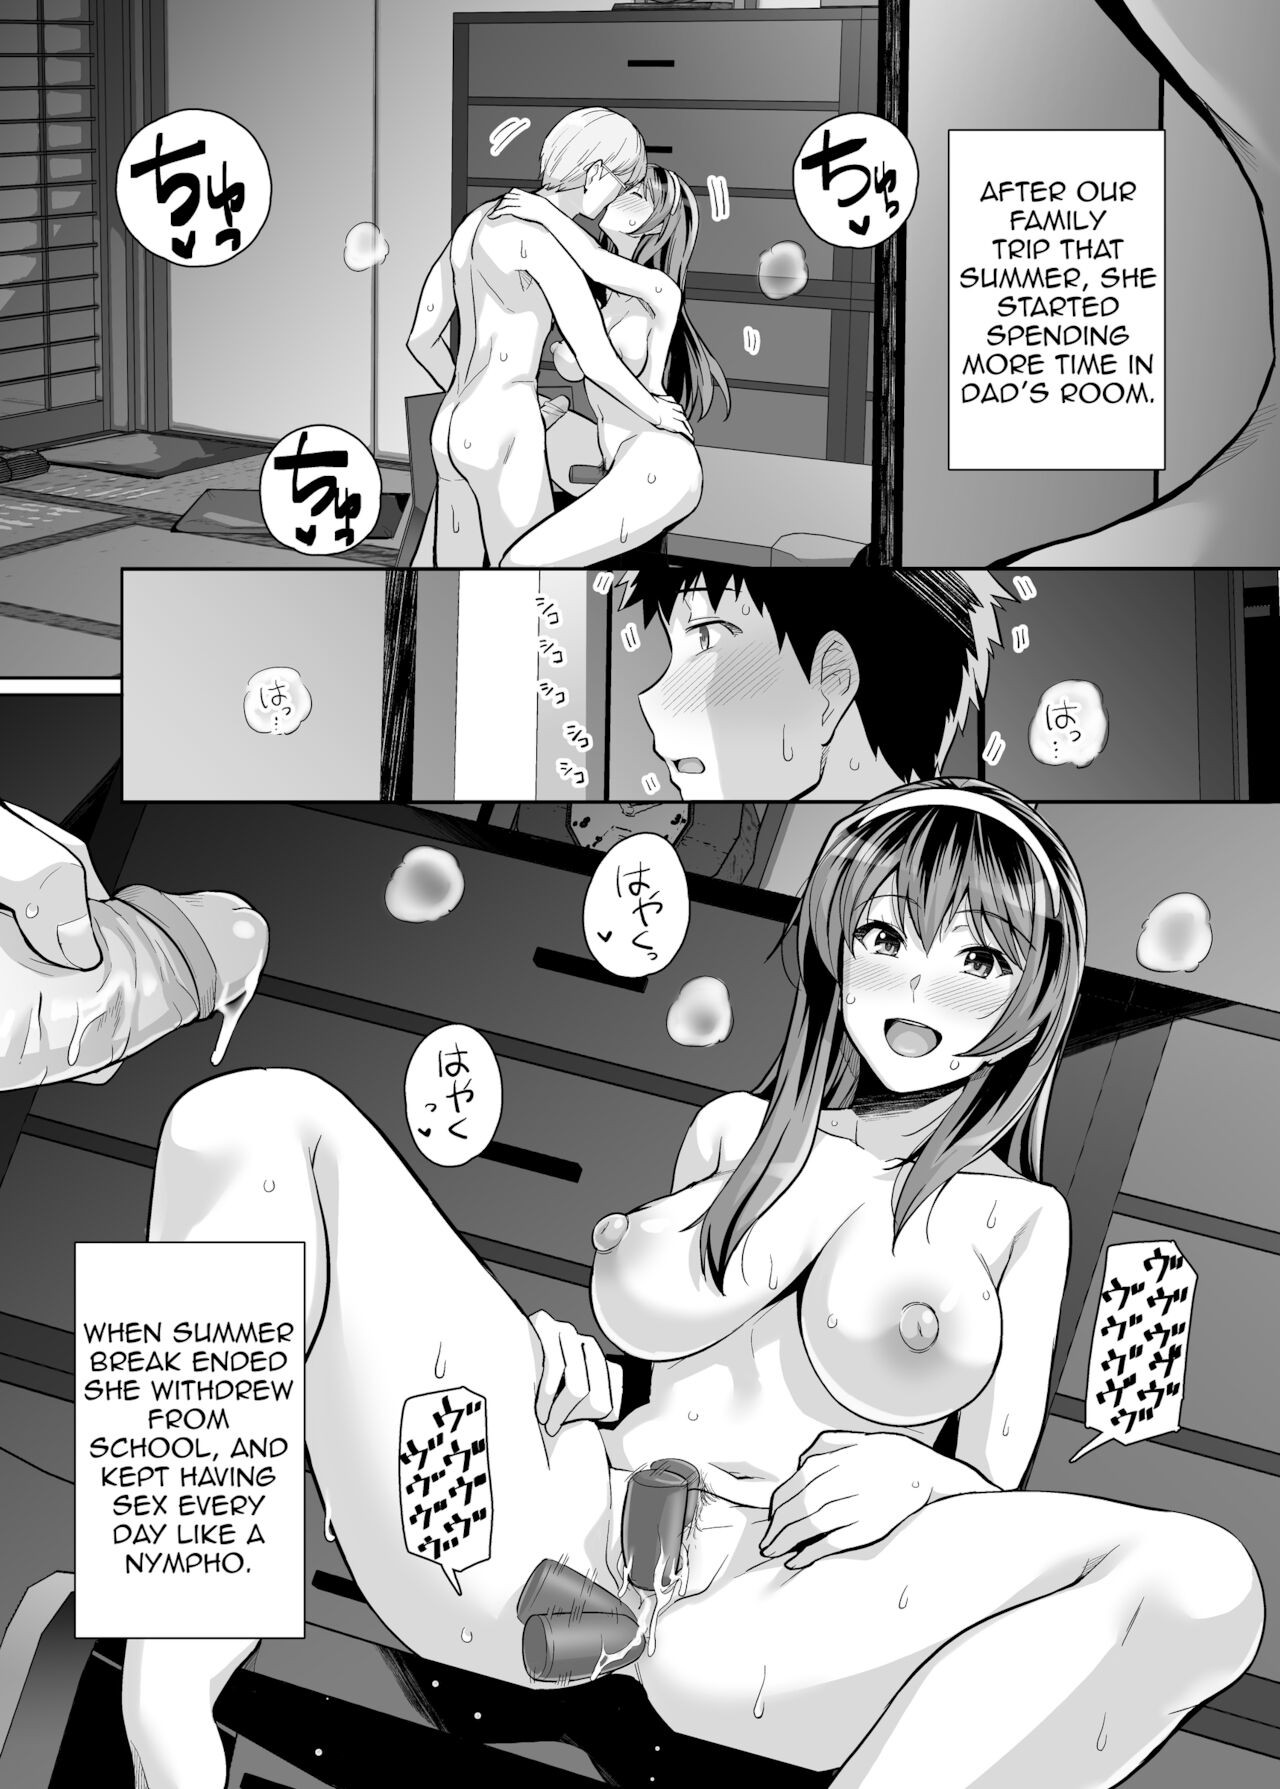 My Sister Sleeps With My Dad Part 3 Porn Comic english 03